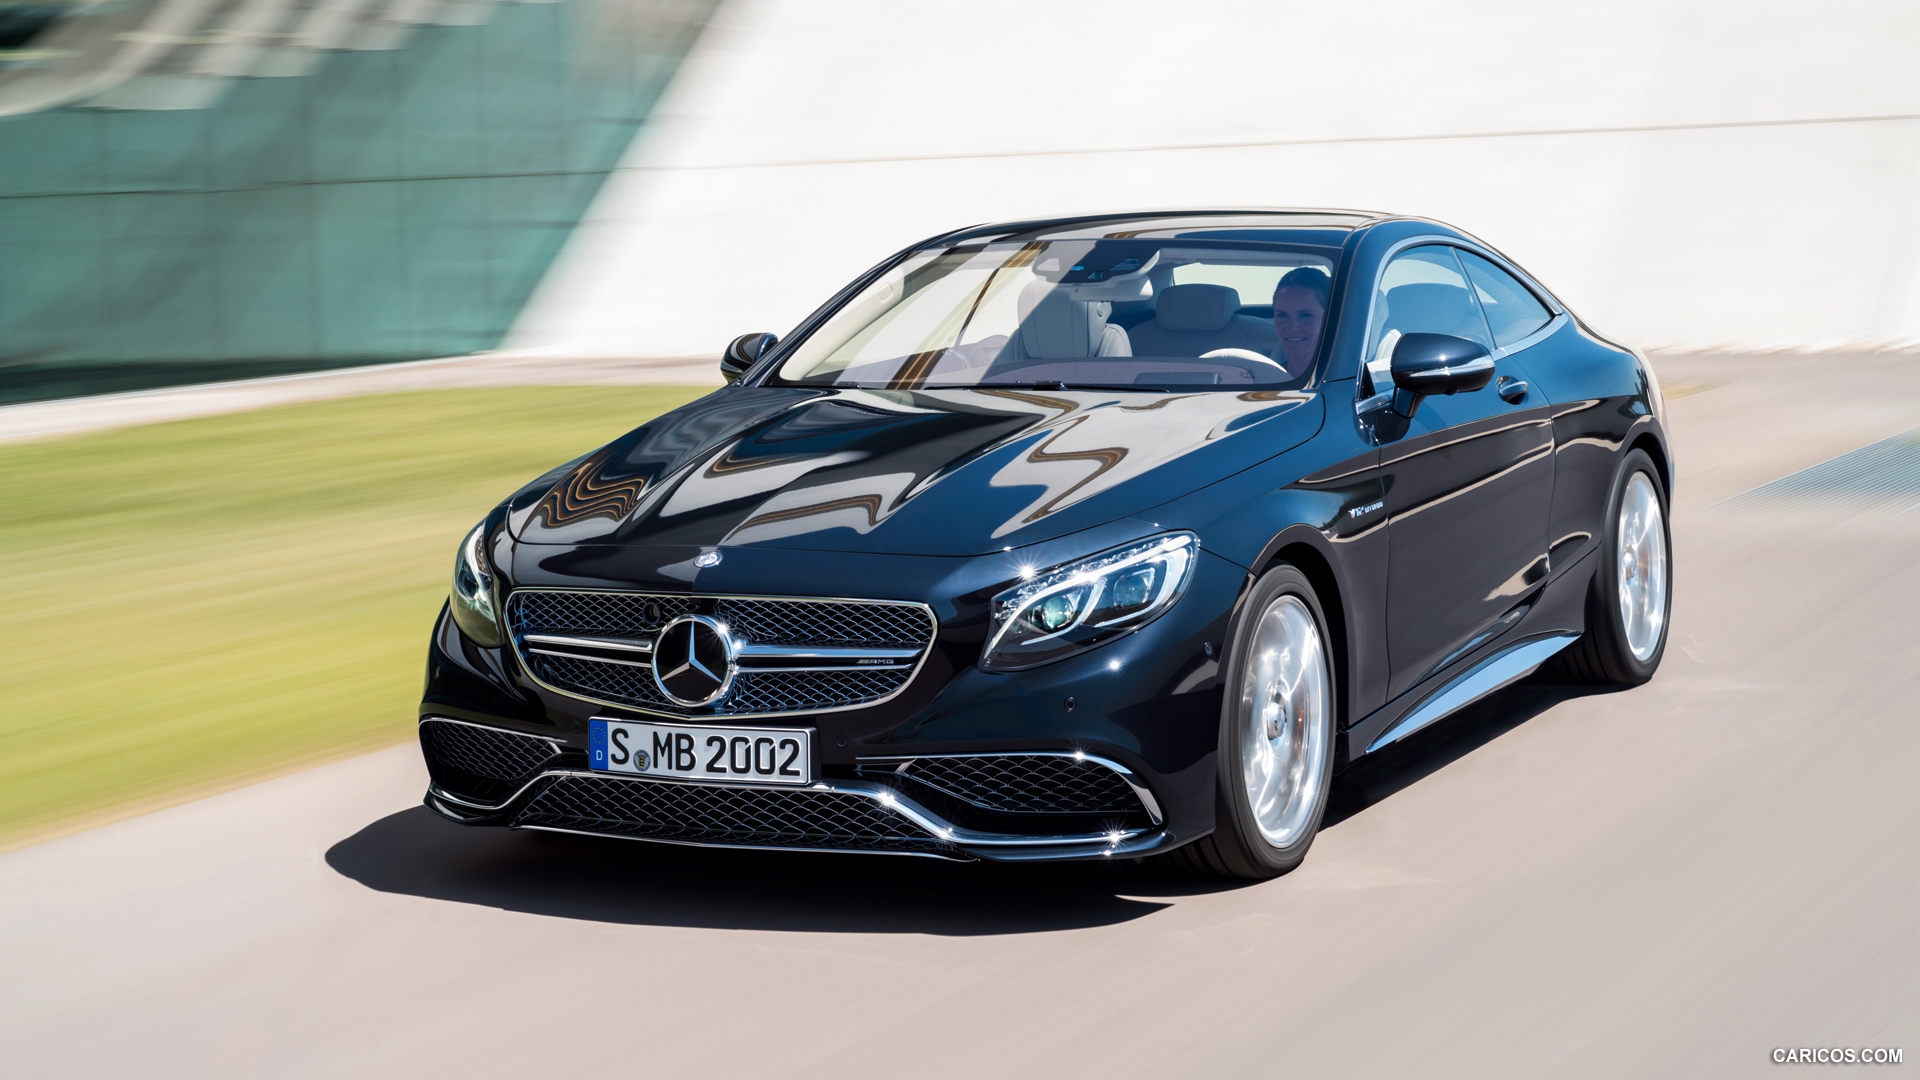 2015 Mercedes-Benz S65 AMG Coupe (Anthracite Blue) - Front, #1 of 101